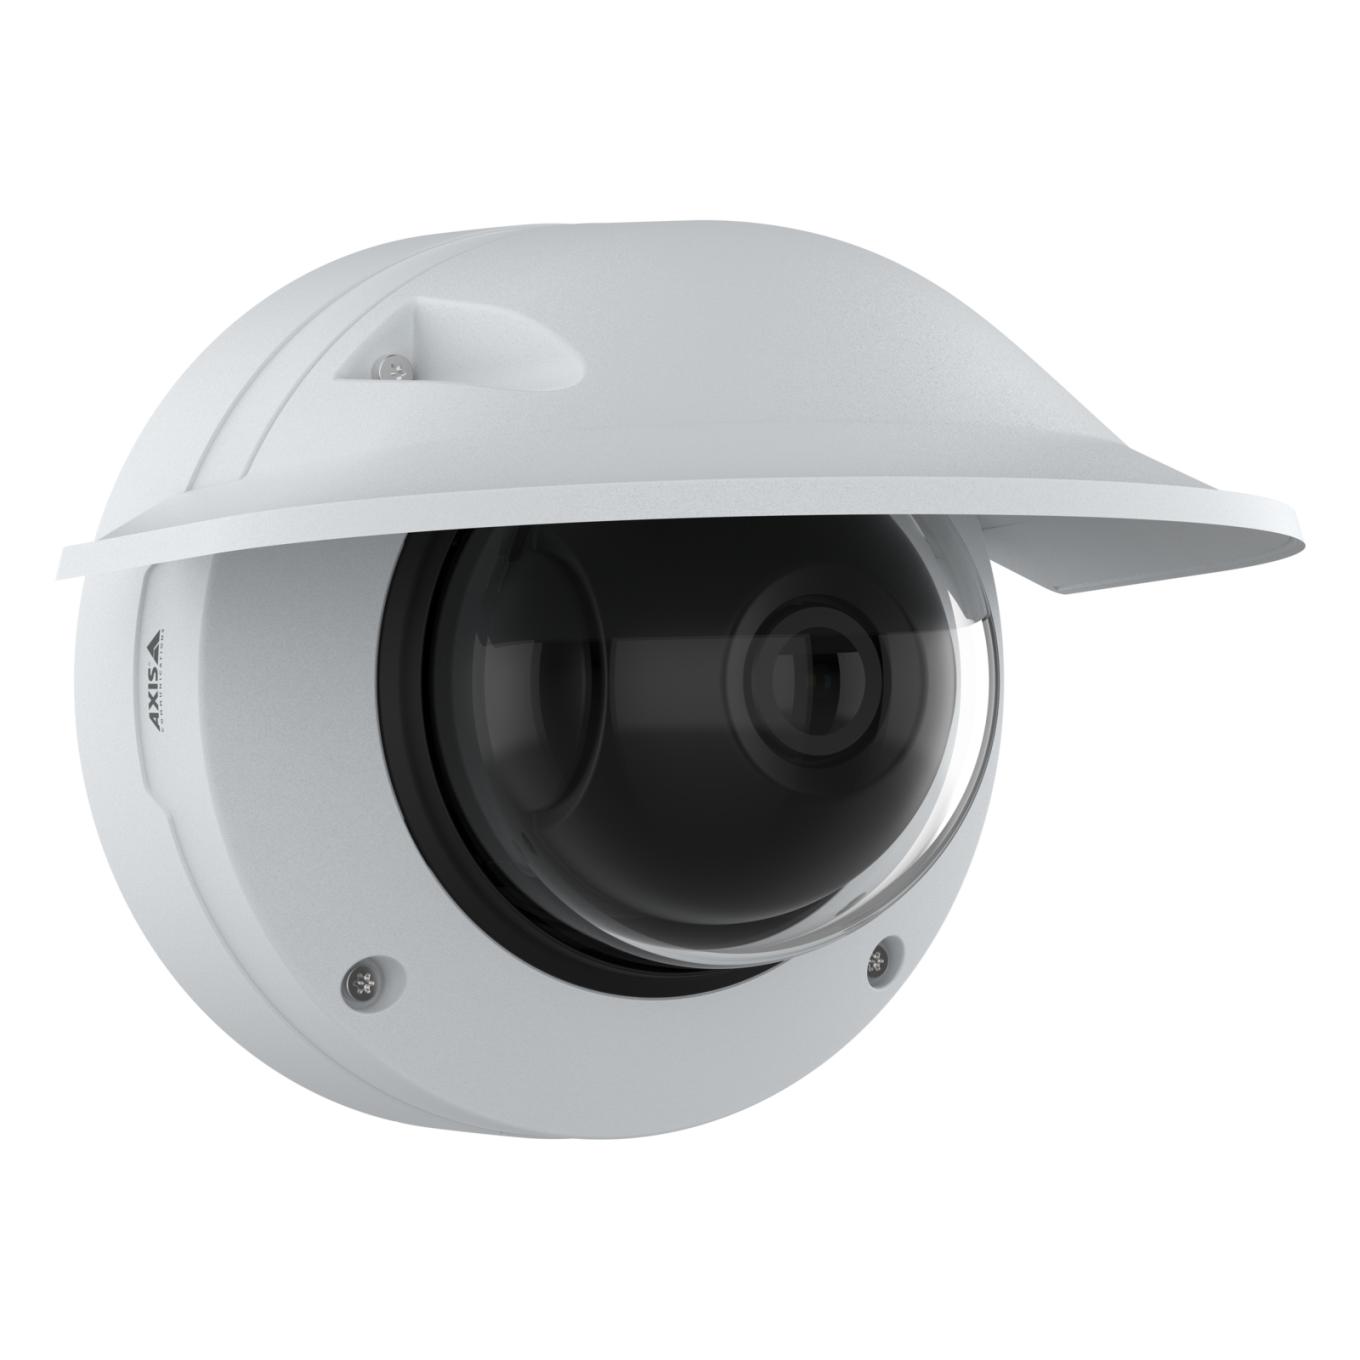 AXIS Q3626-VE Dome Camera